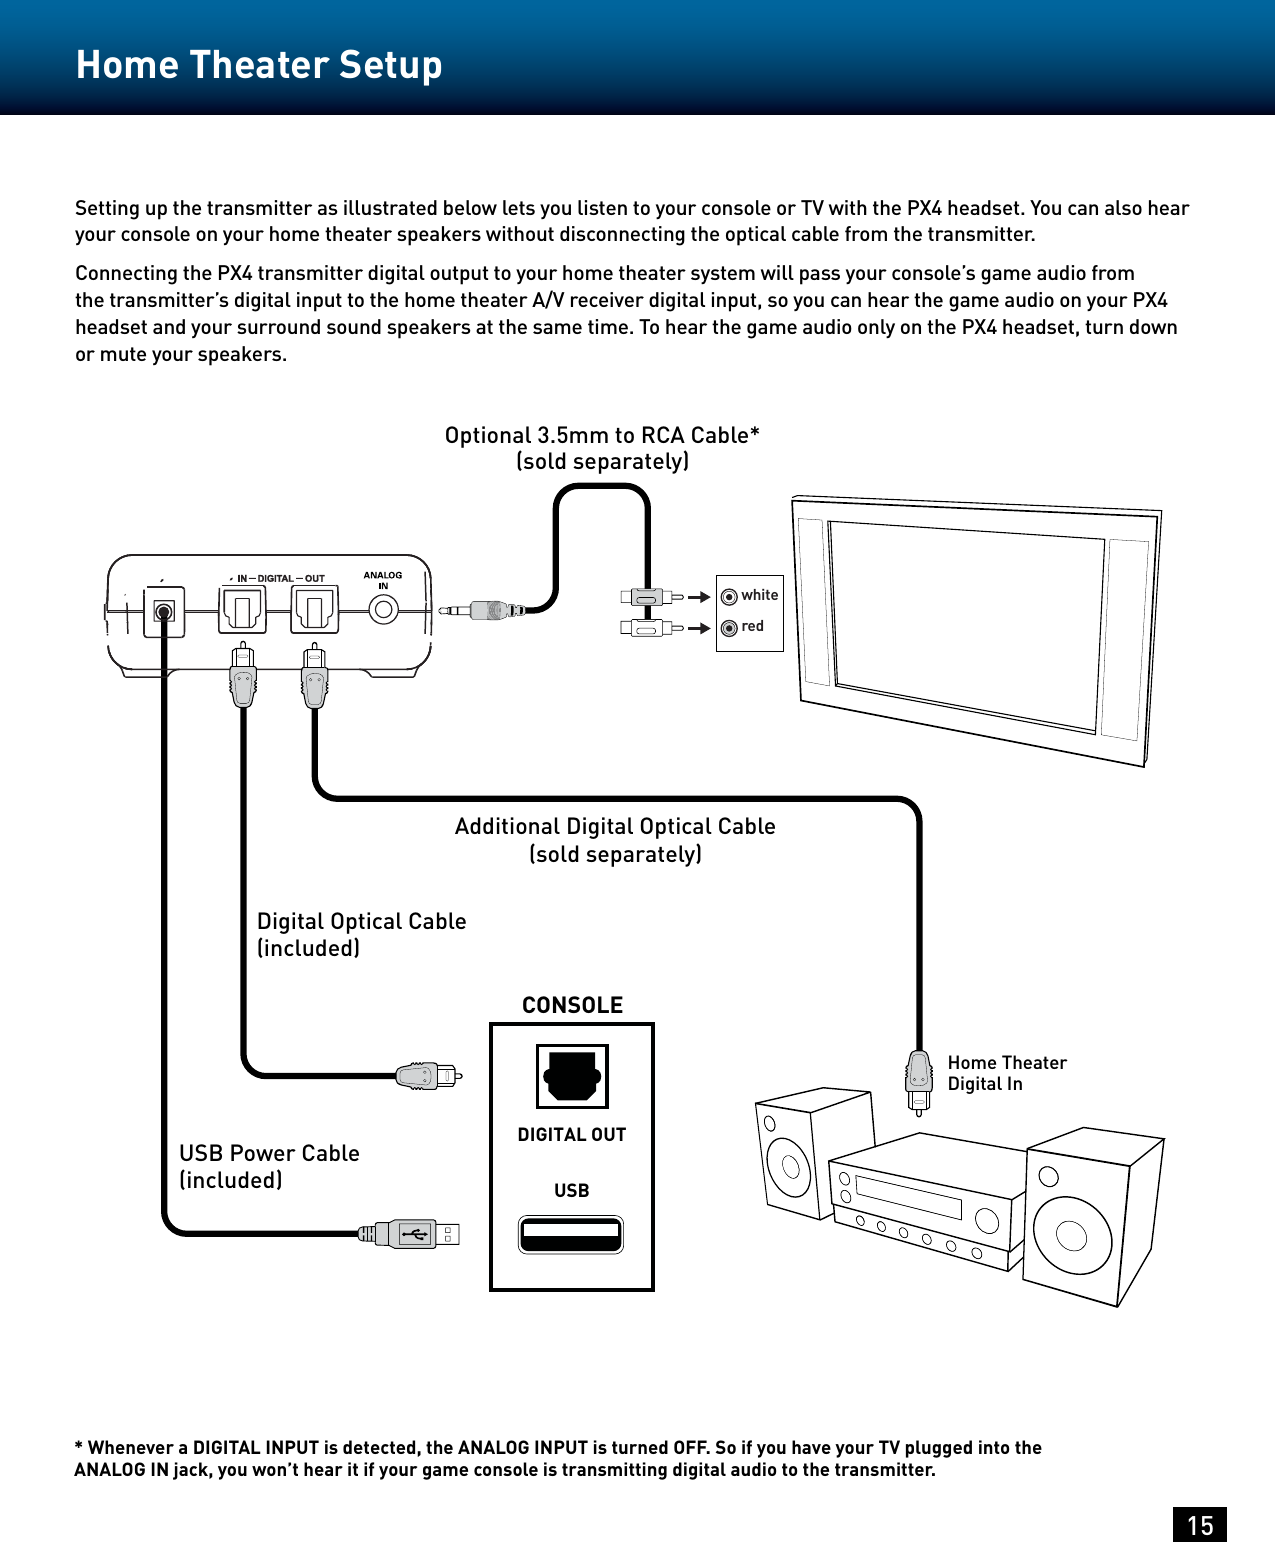 15Home Theater SetupSetting up the transmitter as illustrated below lets you listen to your console or TV with the PX4 headset. You can also hear your console on your home theater speakers without disconnecting the optical cable from the transmitter.Connecting the PX4 transmitter digital output to your home theater system will pass your console’s game audio from the transmitter’s digital input to the home theater A/V receiver digital input, so you can hear the game audio on your PX4 headset and your surround sound speakers at the same time. To hear the game audio only on the PX4 headset, turn down or mute your speakers.* Whenever a DIGITAL INPUT is detected, the ANALOG INPUT is turned OFF. So if you have your TV plugged into the ANALOG IN jack, you won’t hear it if your game console is transmitting digital audio to the transmitter.Home TheaterDIGITAL OUTUSB Digital InDigital Optical Cable(included)USB Power Cable (included)Additional Digital Optical Cable(sold separately) Optional 3.5mm to RCA Cable* (sold separately)whiteredCONSOLE